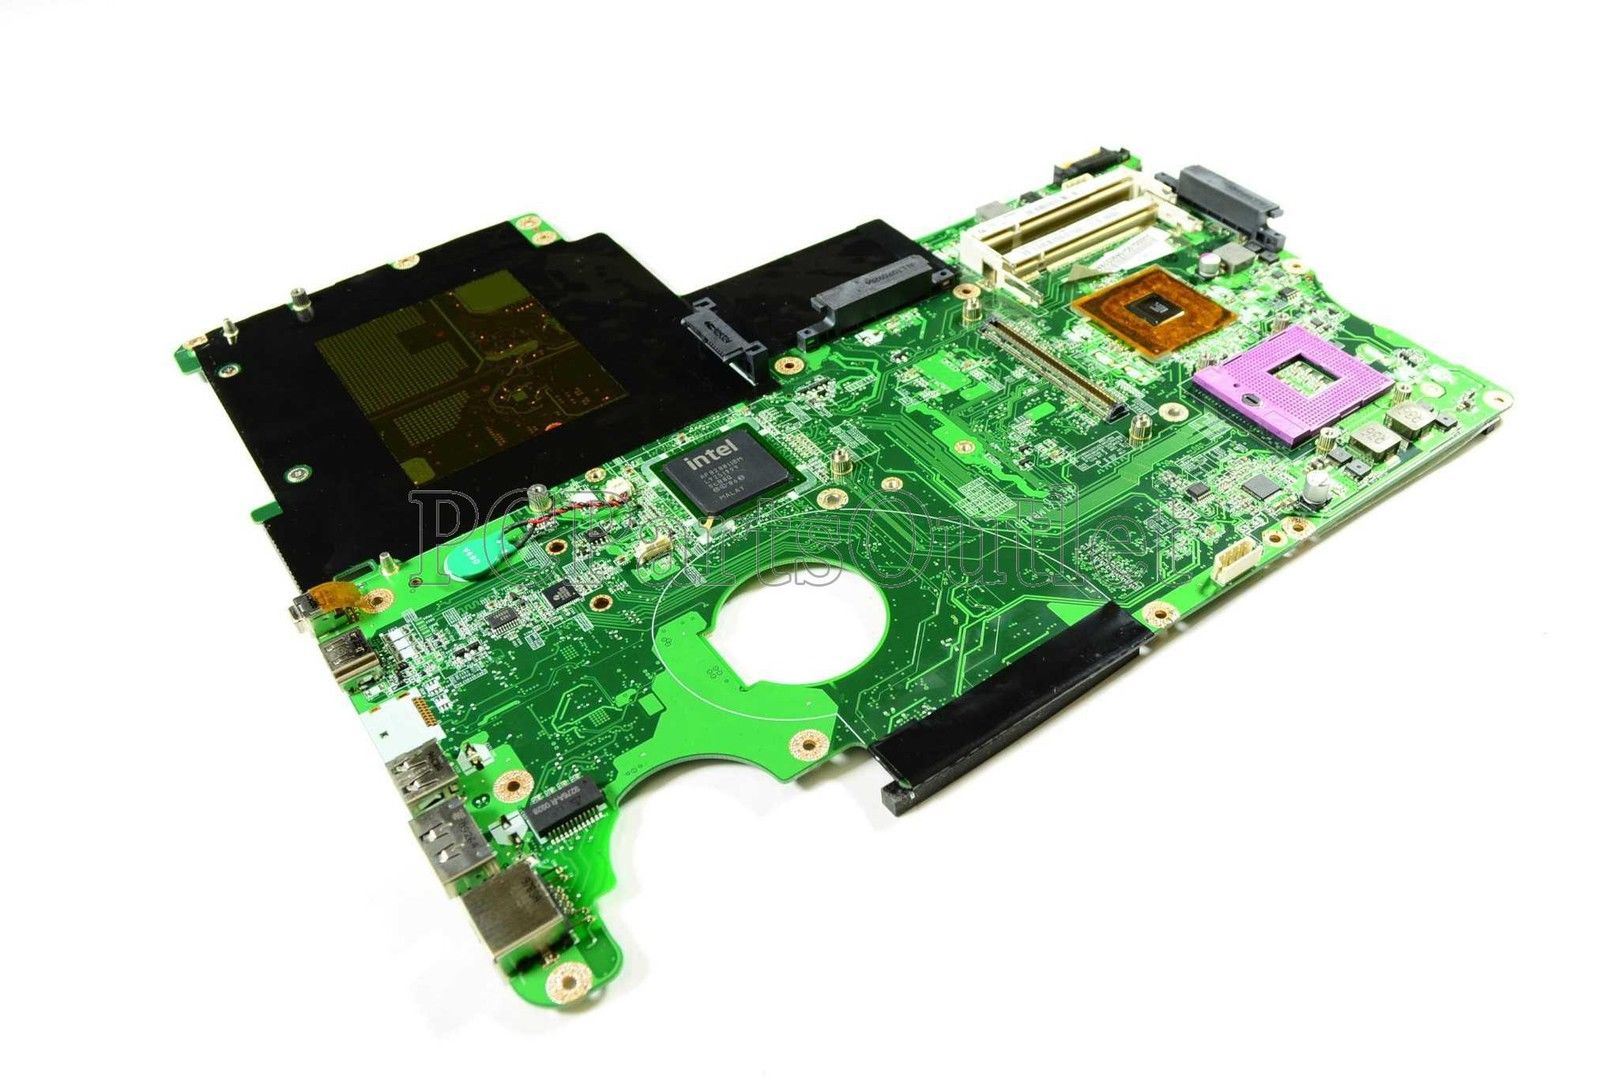 Toshiba Satellite P505 Series Intel CPU Motherboard A000049540 G - Click Image to Close